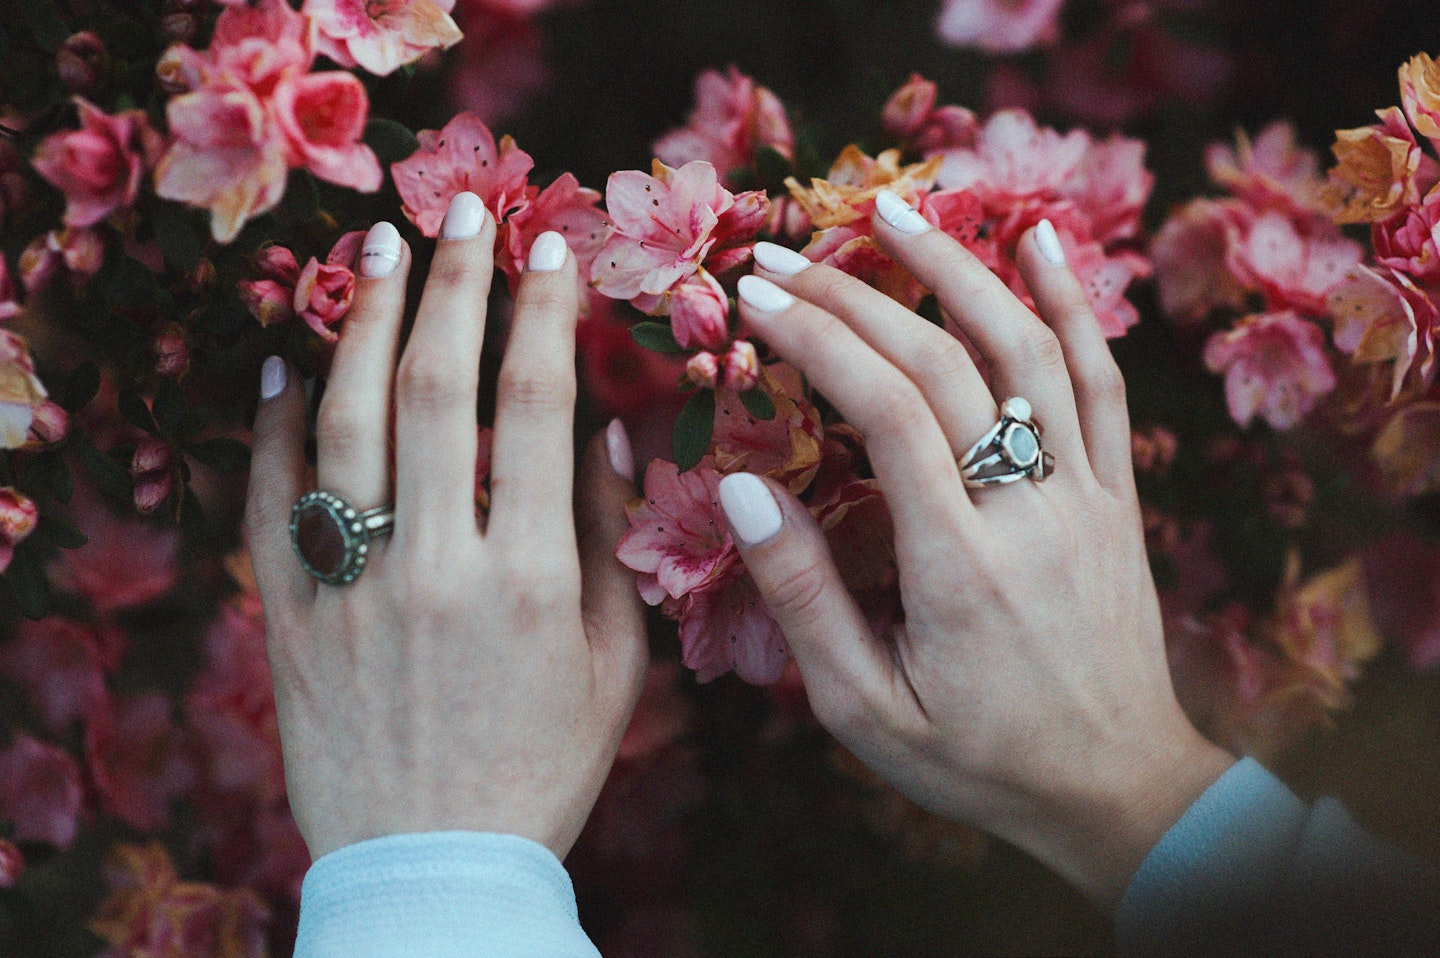 Woman placing hands on flowers